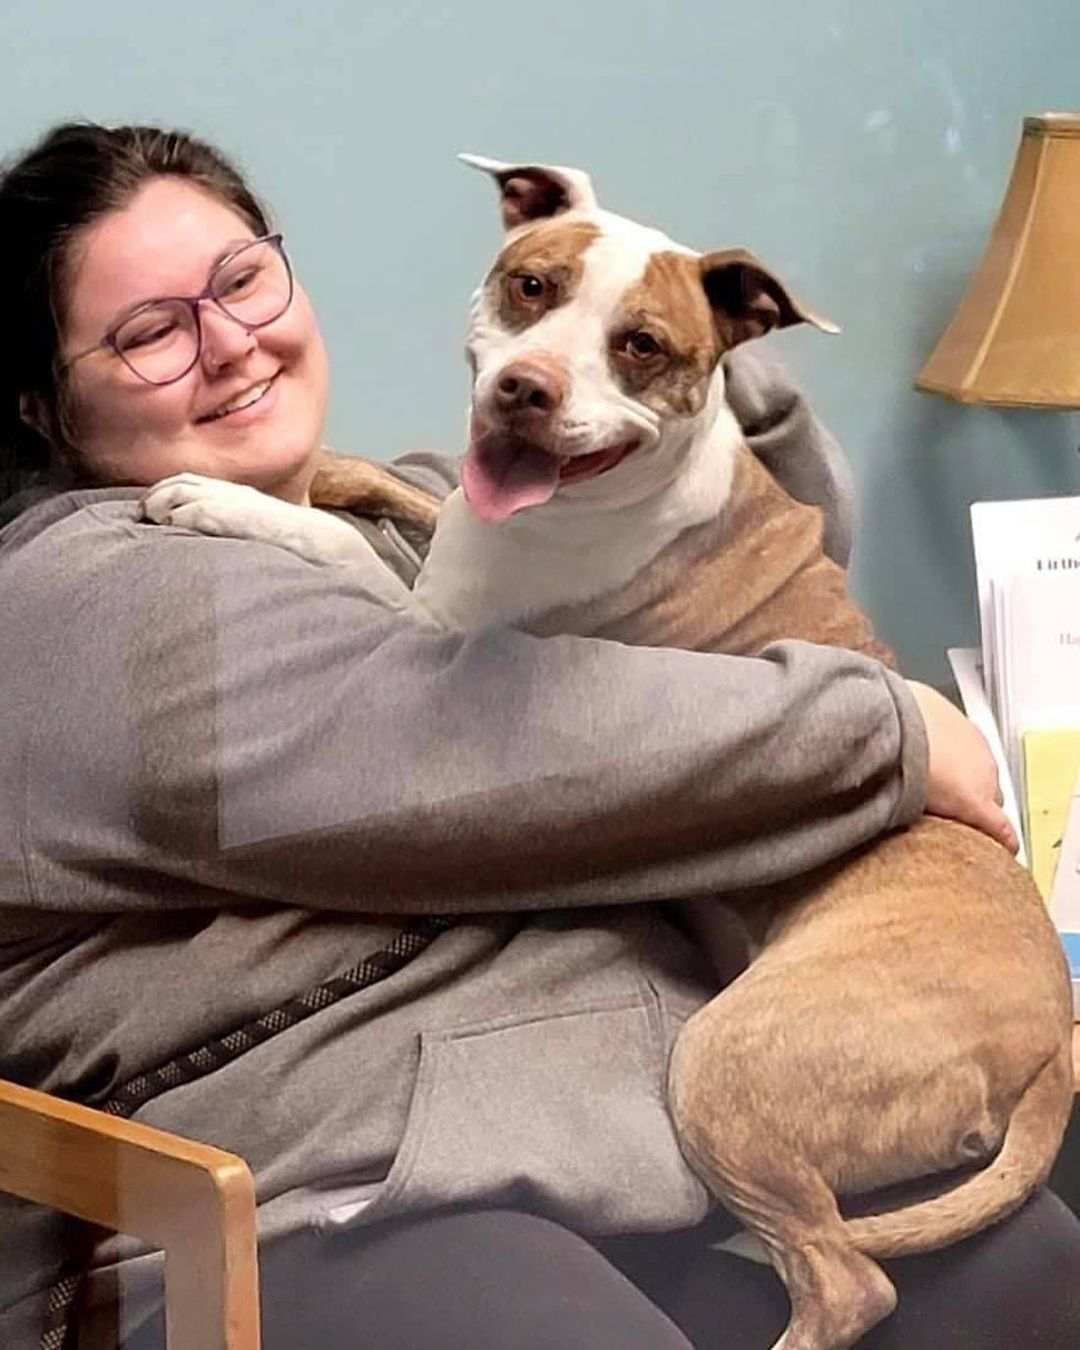 Are you having a rough day and could use a hug? Diamond is the girl for the job! 🥰 This sweet lady loves to give hugs and kisses and would snuggle up all day if she could. Diamond is really hoping to find her forever home soon where she can get endless cuddles. ☺️❤️ Check her out on our website under “Available Dogs” and fill out the application if interested.